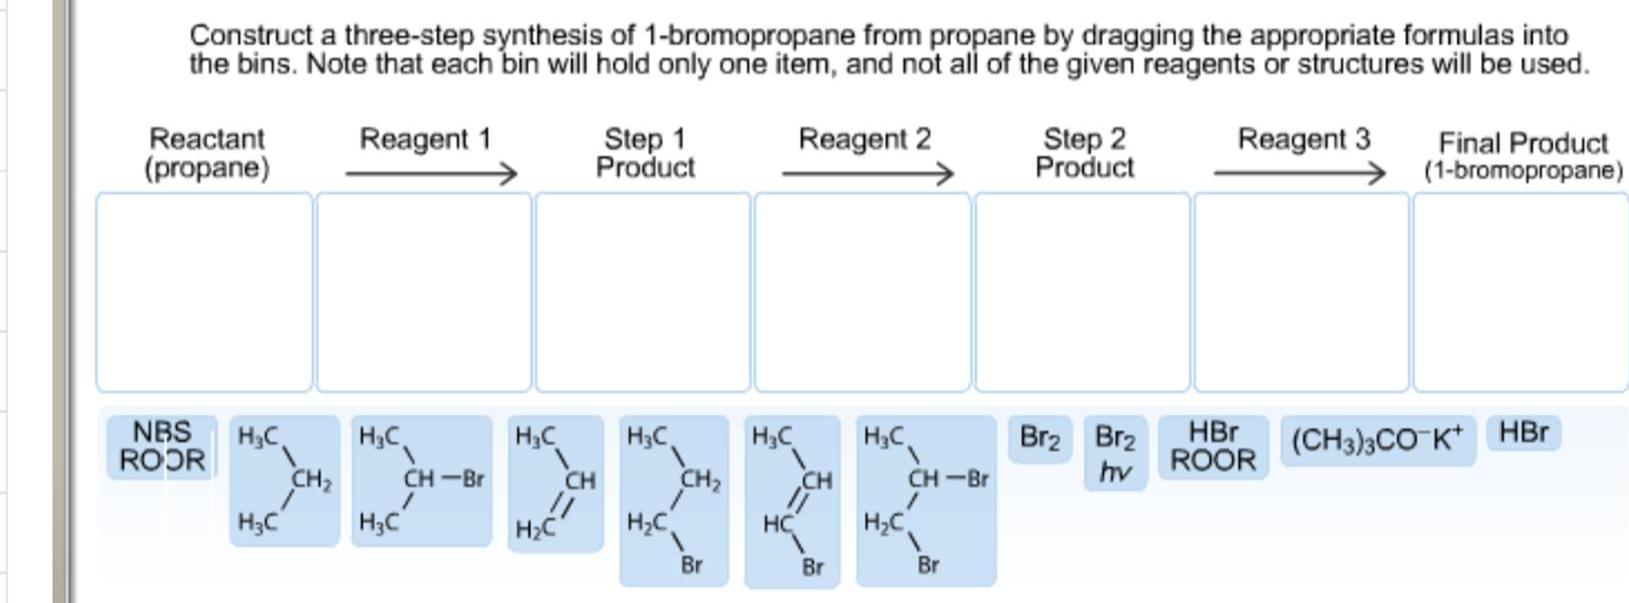 Construct a three-step synthesis of 1-bromopropane